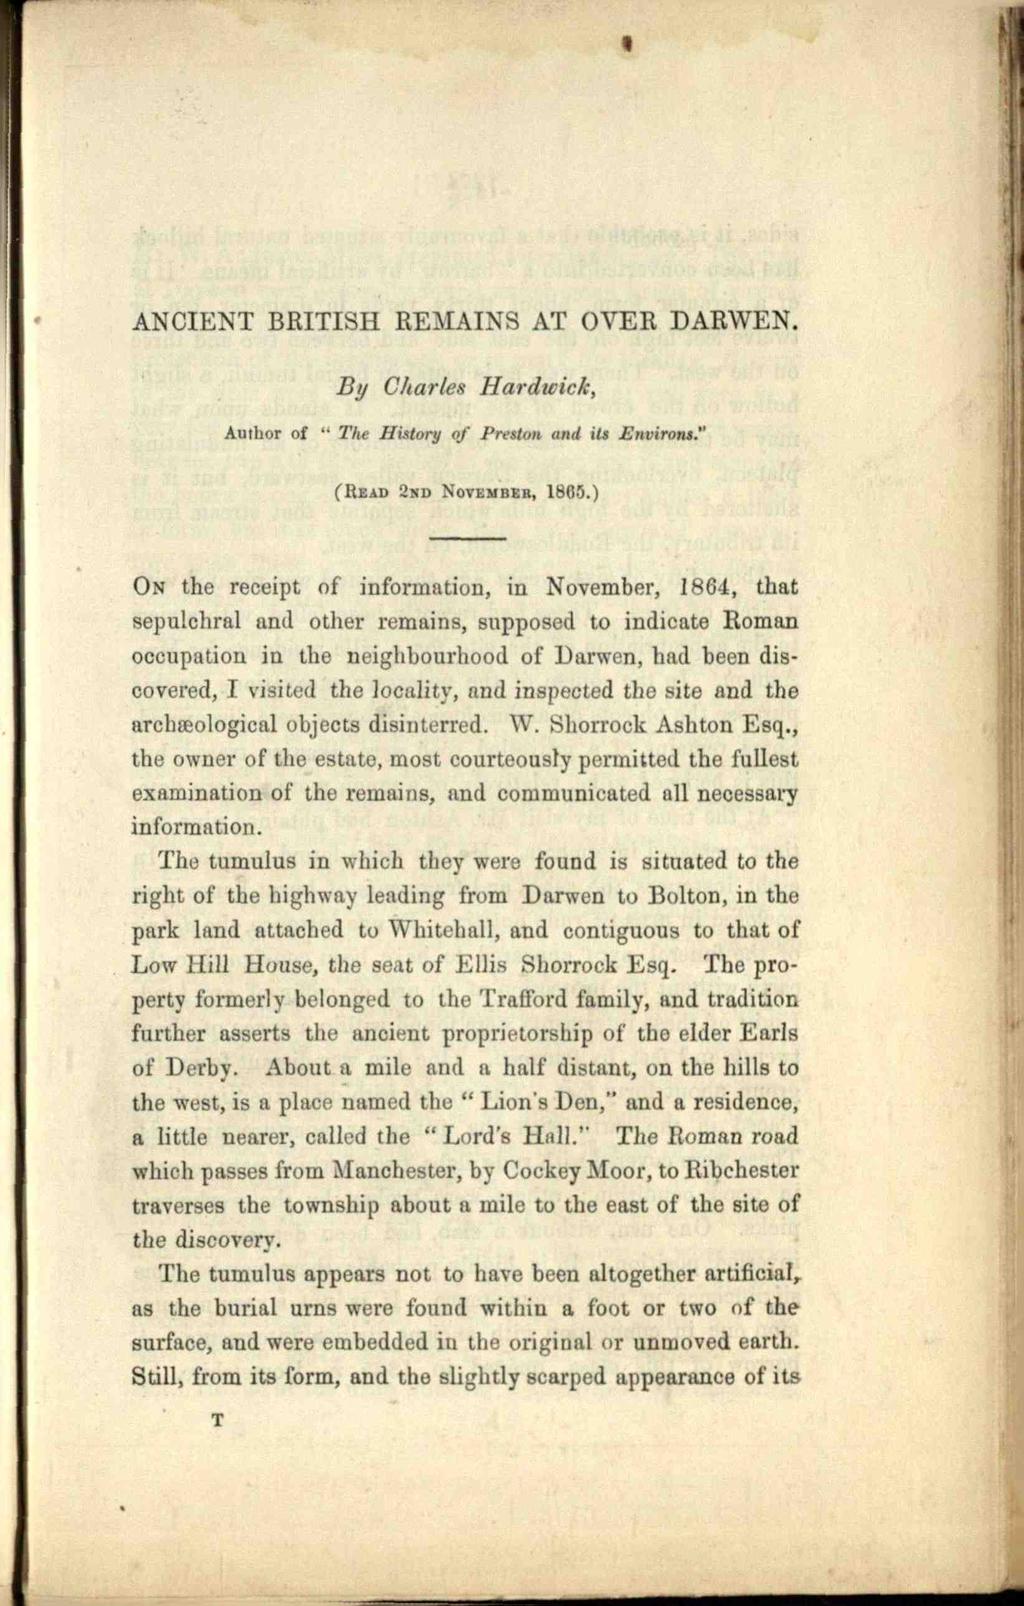 ANCIENT BRITISH REMAINS AT OVER DARWEN. By diaries Hardwick, Author of " The History of Pretton and ill Envirotu." (READ 2sD NOVEMBER, 1865.